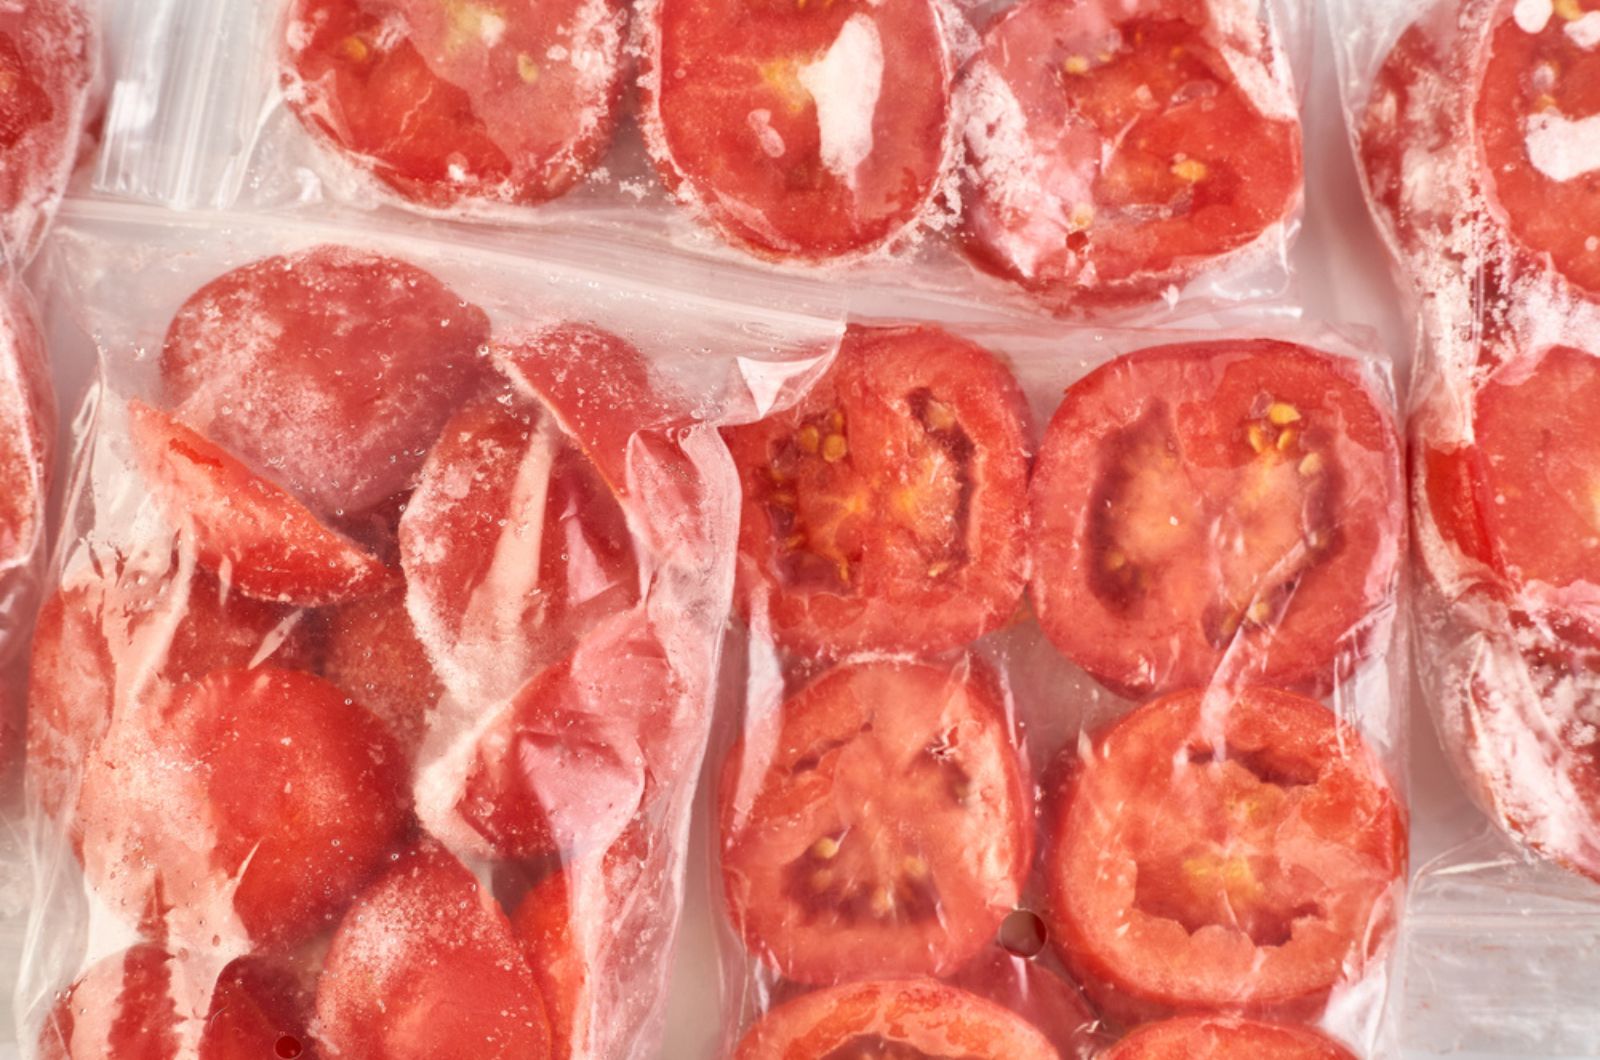 Frozen tomato slices are packed in plastic bag 